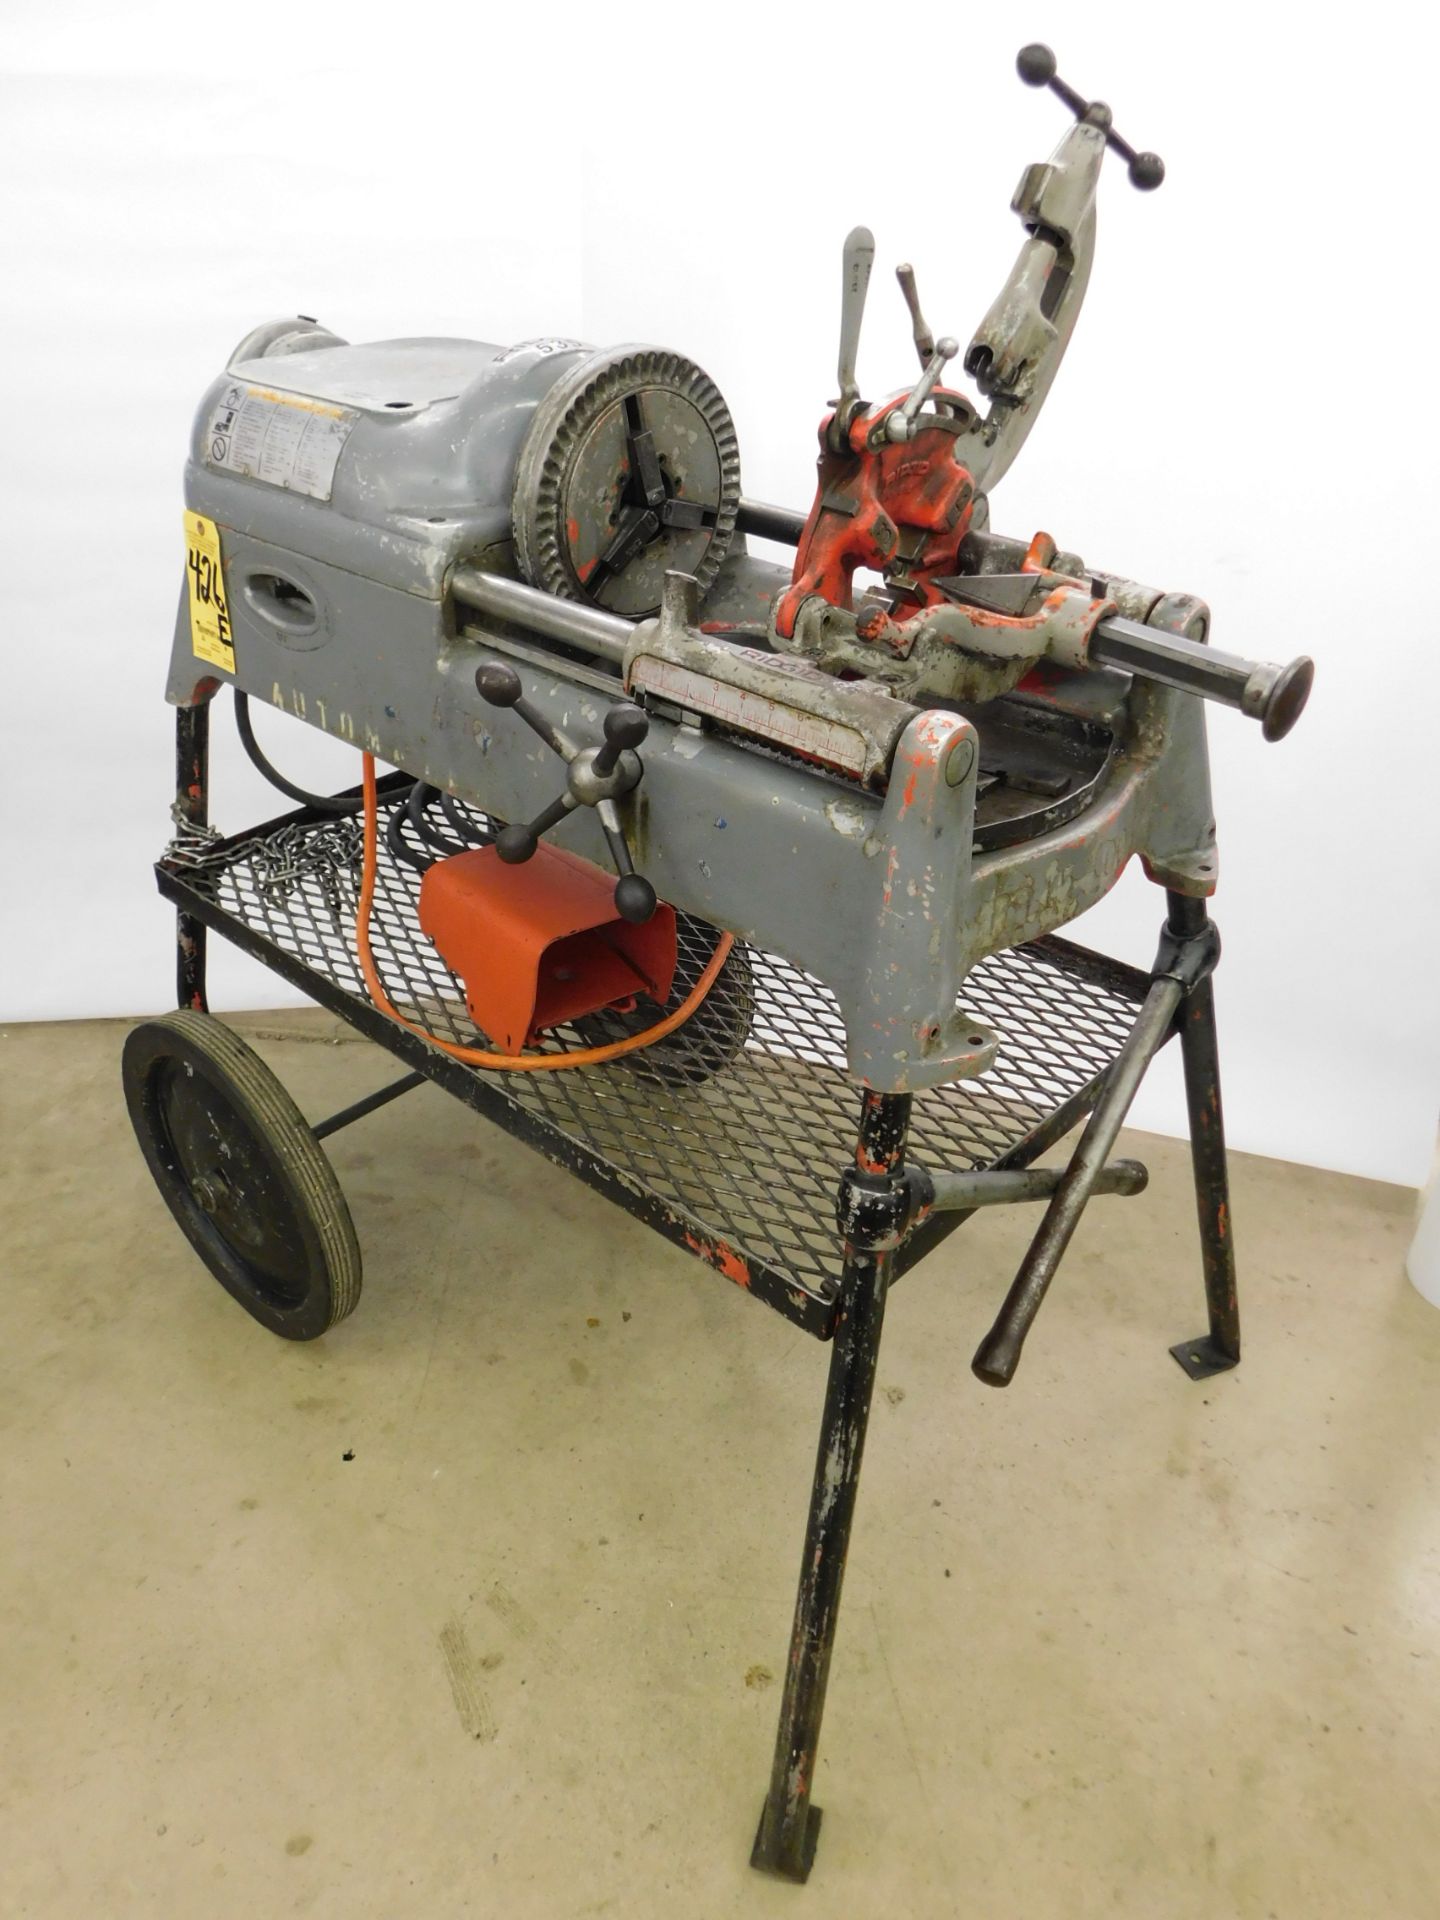 Ridgid Model 535 Pipe Threader, SN EC0 3267, with Die Head, Pipe Cut-Off, Reamer, and Foot Pedal